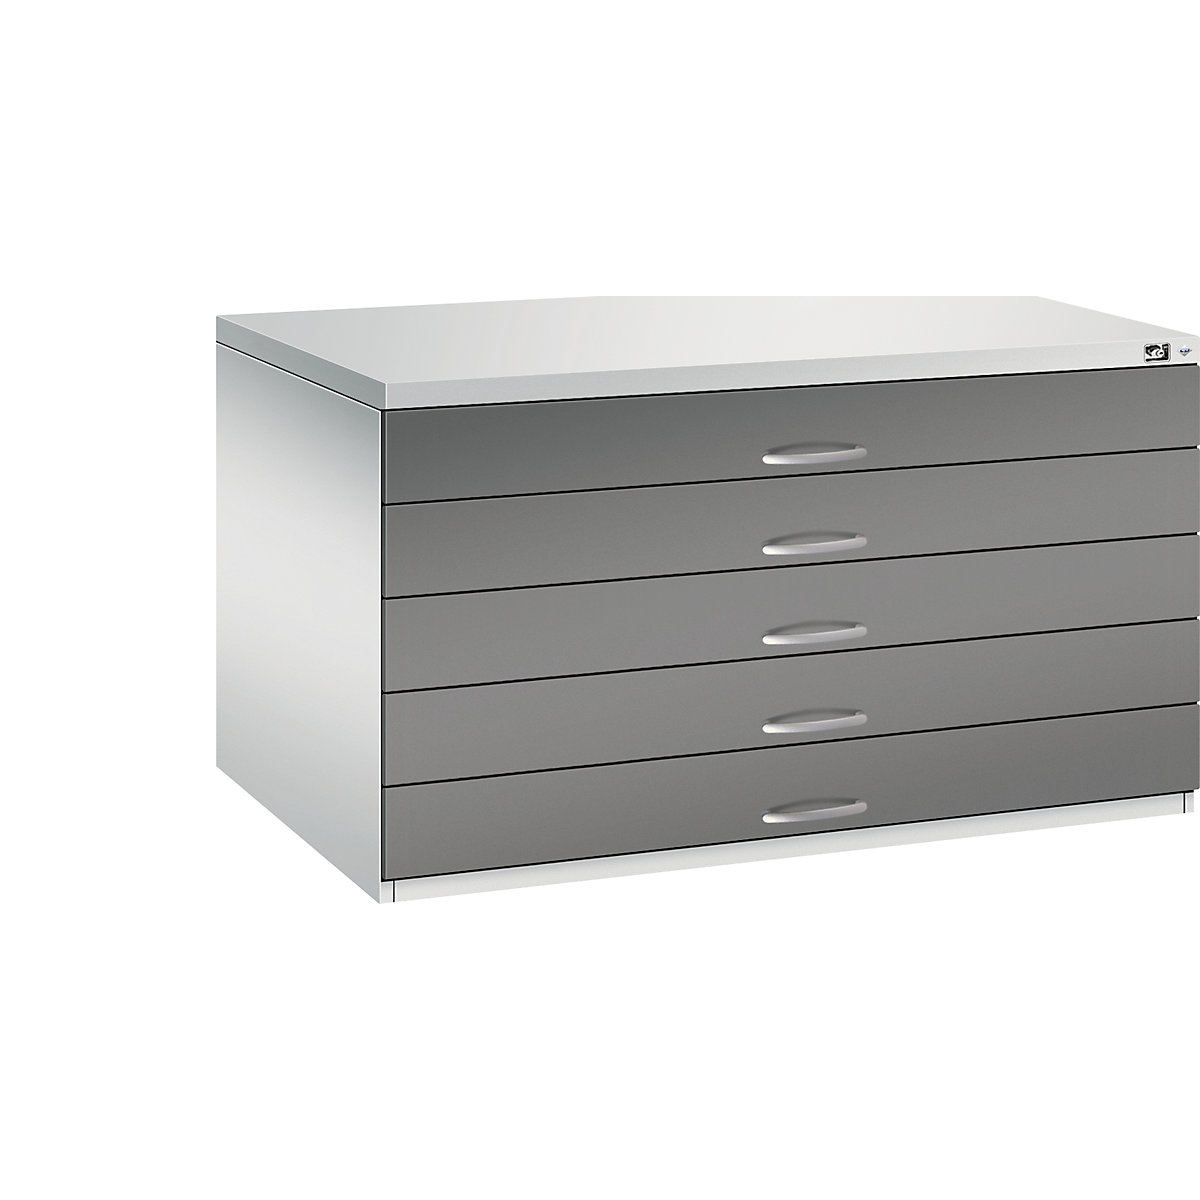 Drawing cabinet – C+P, A0, 5 drawers, height 760 mm, light grey / volcanic grey-13